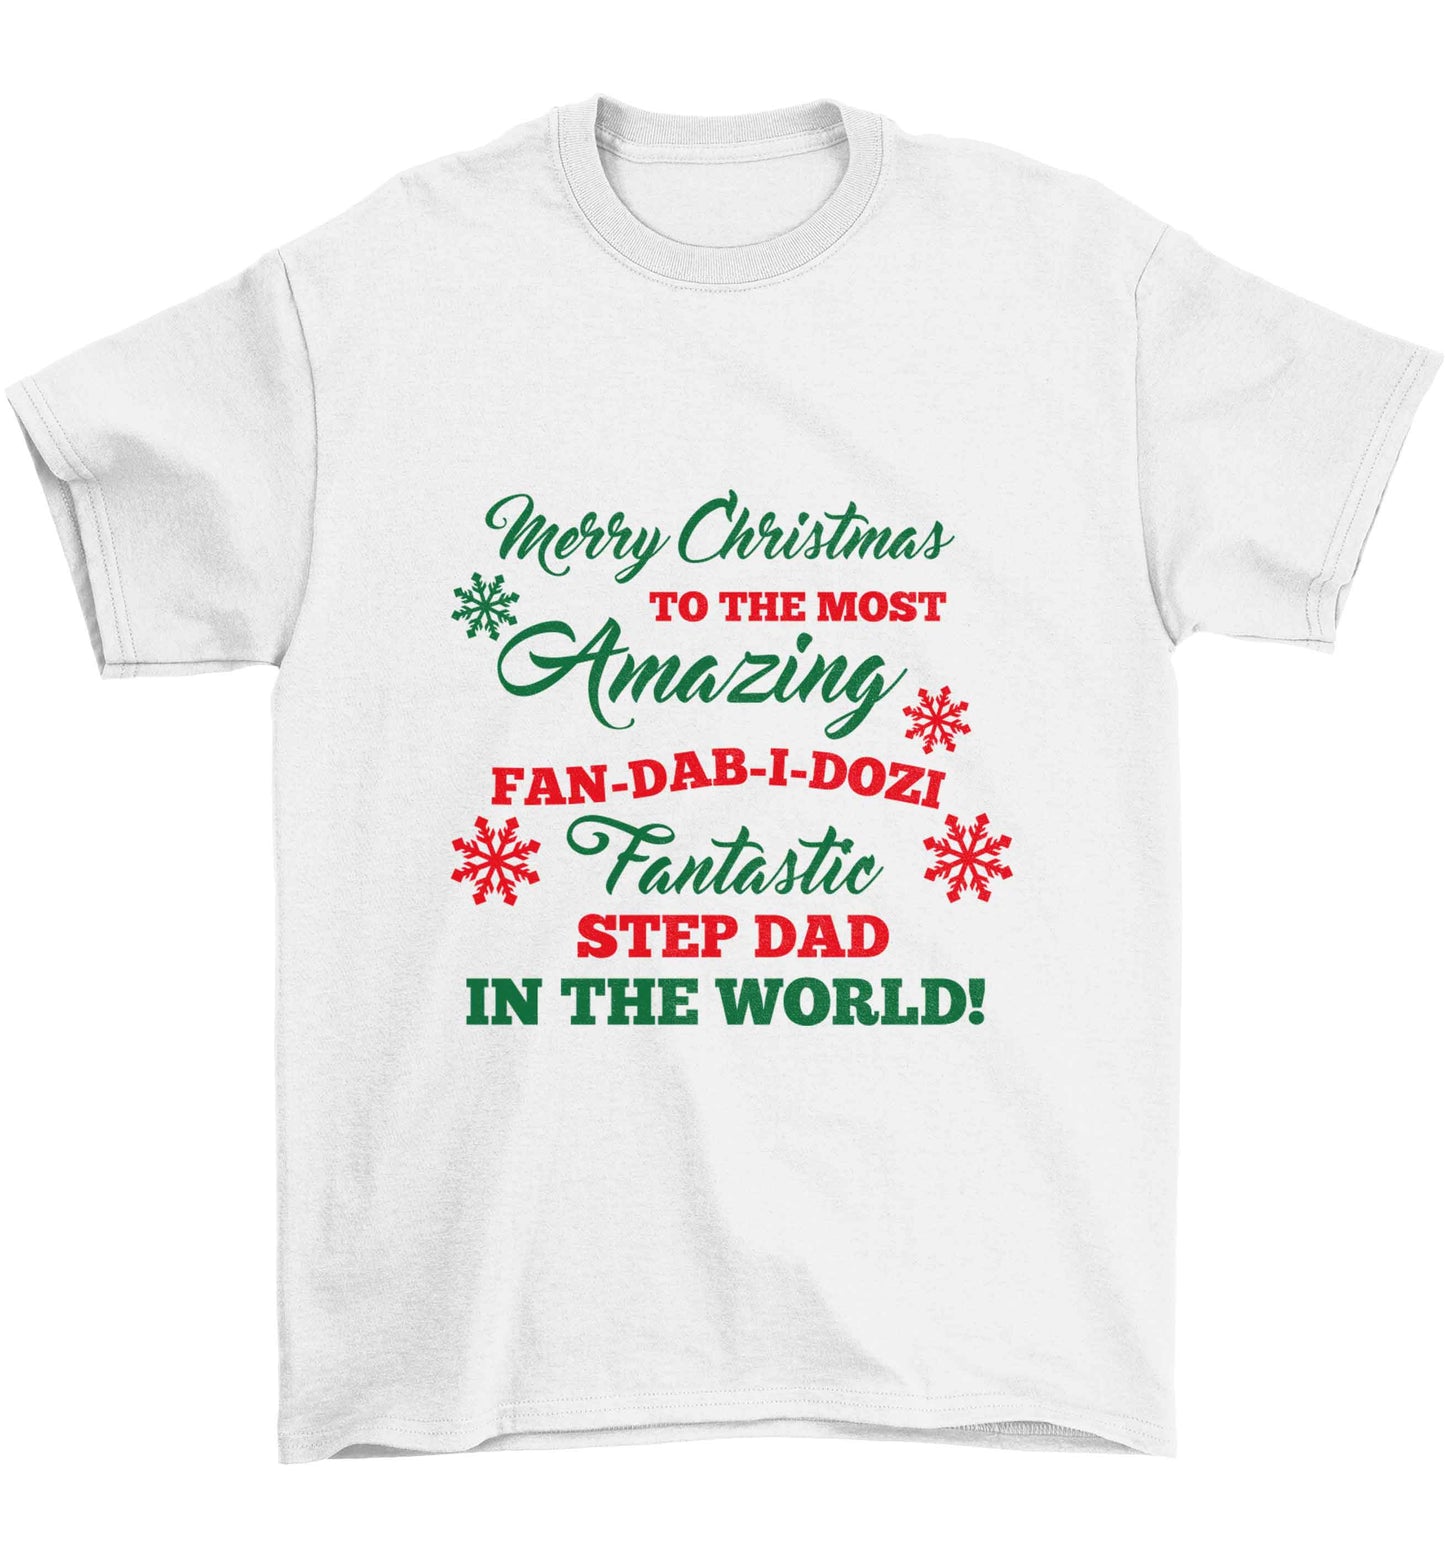 Merry Christmas to the most amazing fan-dab-i-dozi fantasic Step Dad in the world Children's white Tshirt 12-13 Years